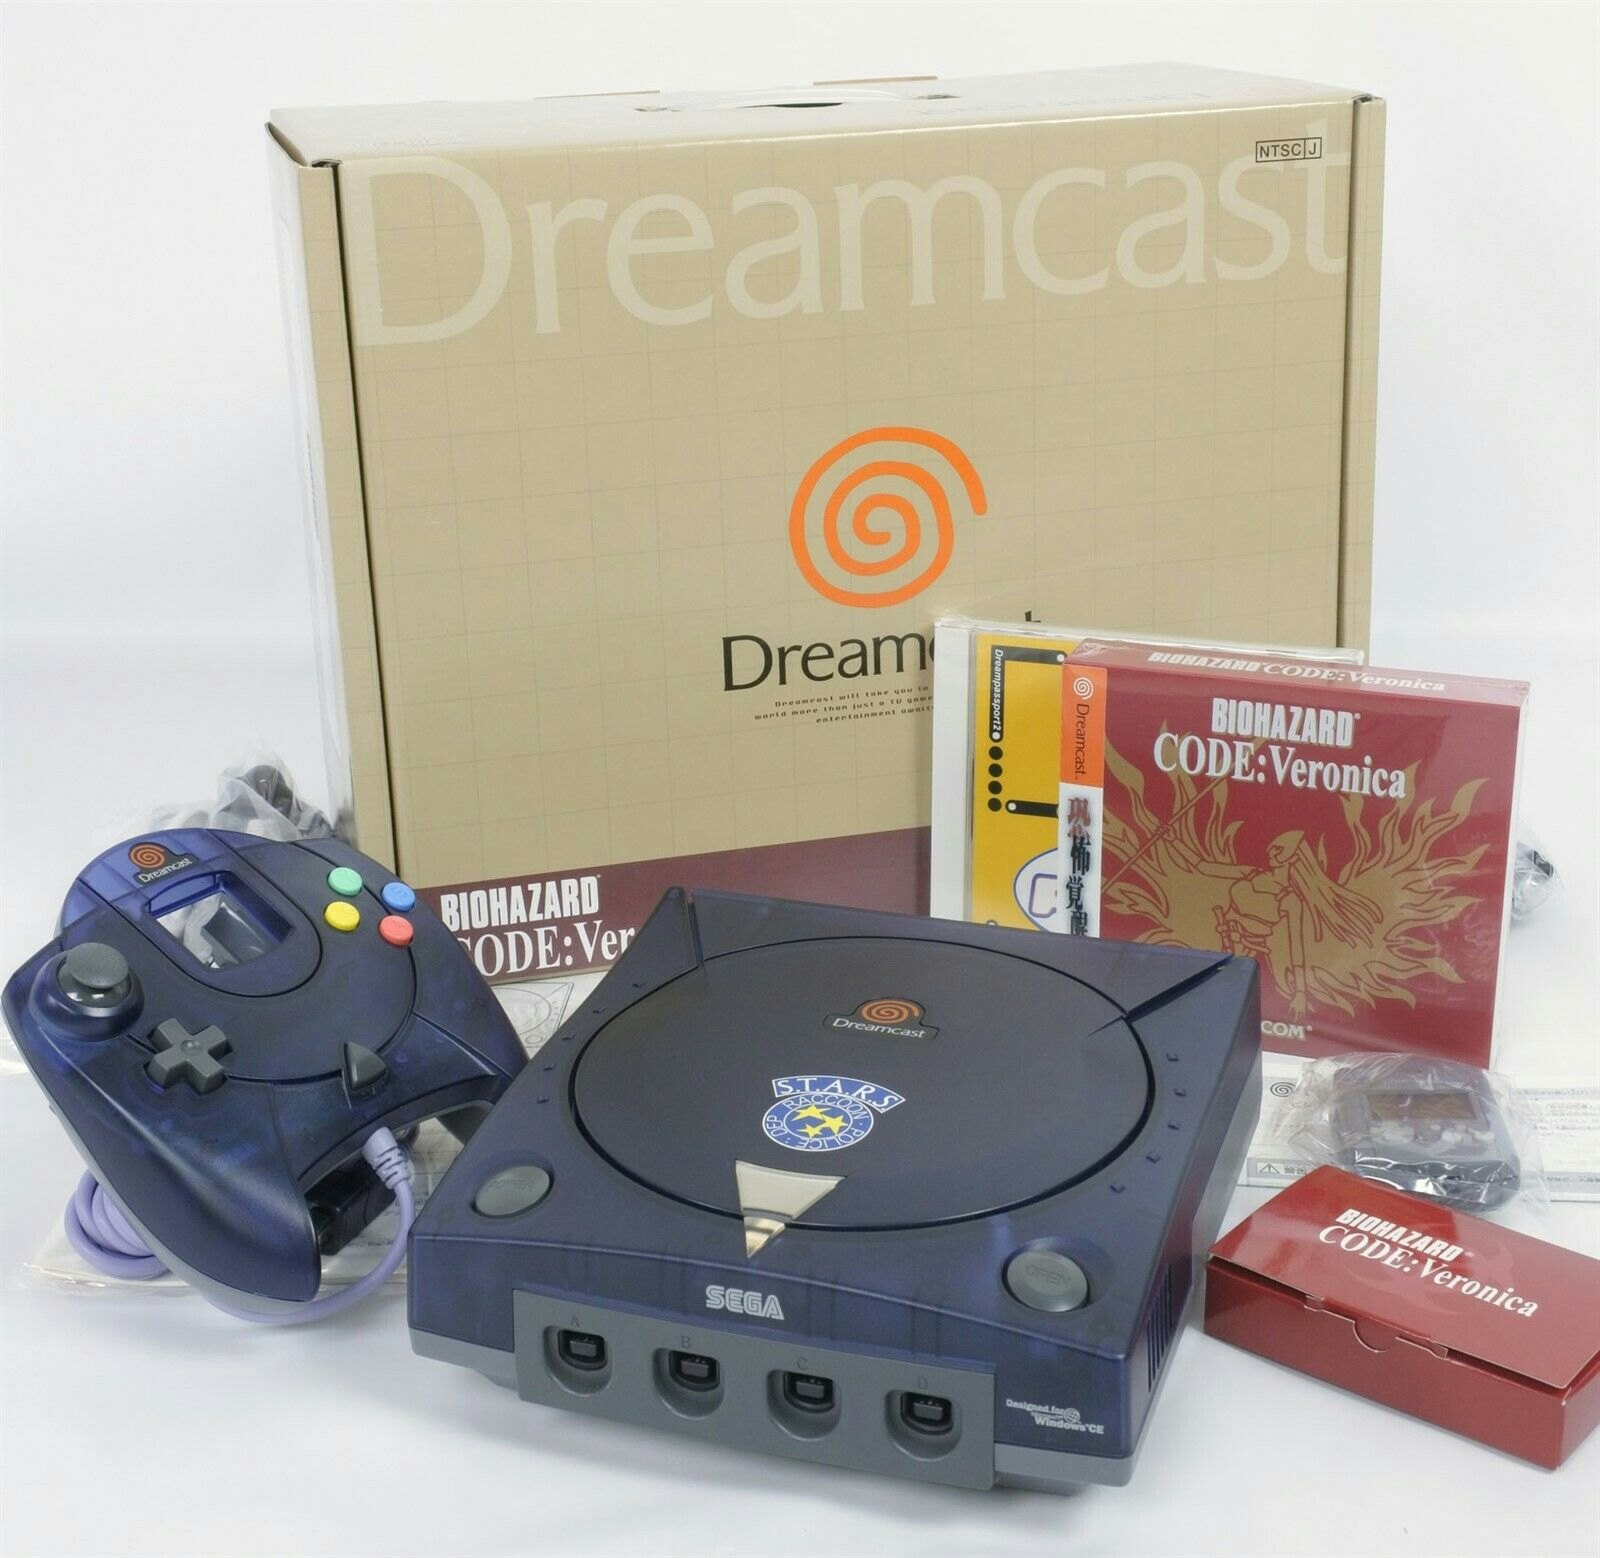 This mint condition 'Resident Evil'-themed Dreamcast only costs $18k